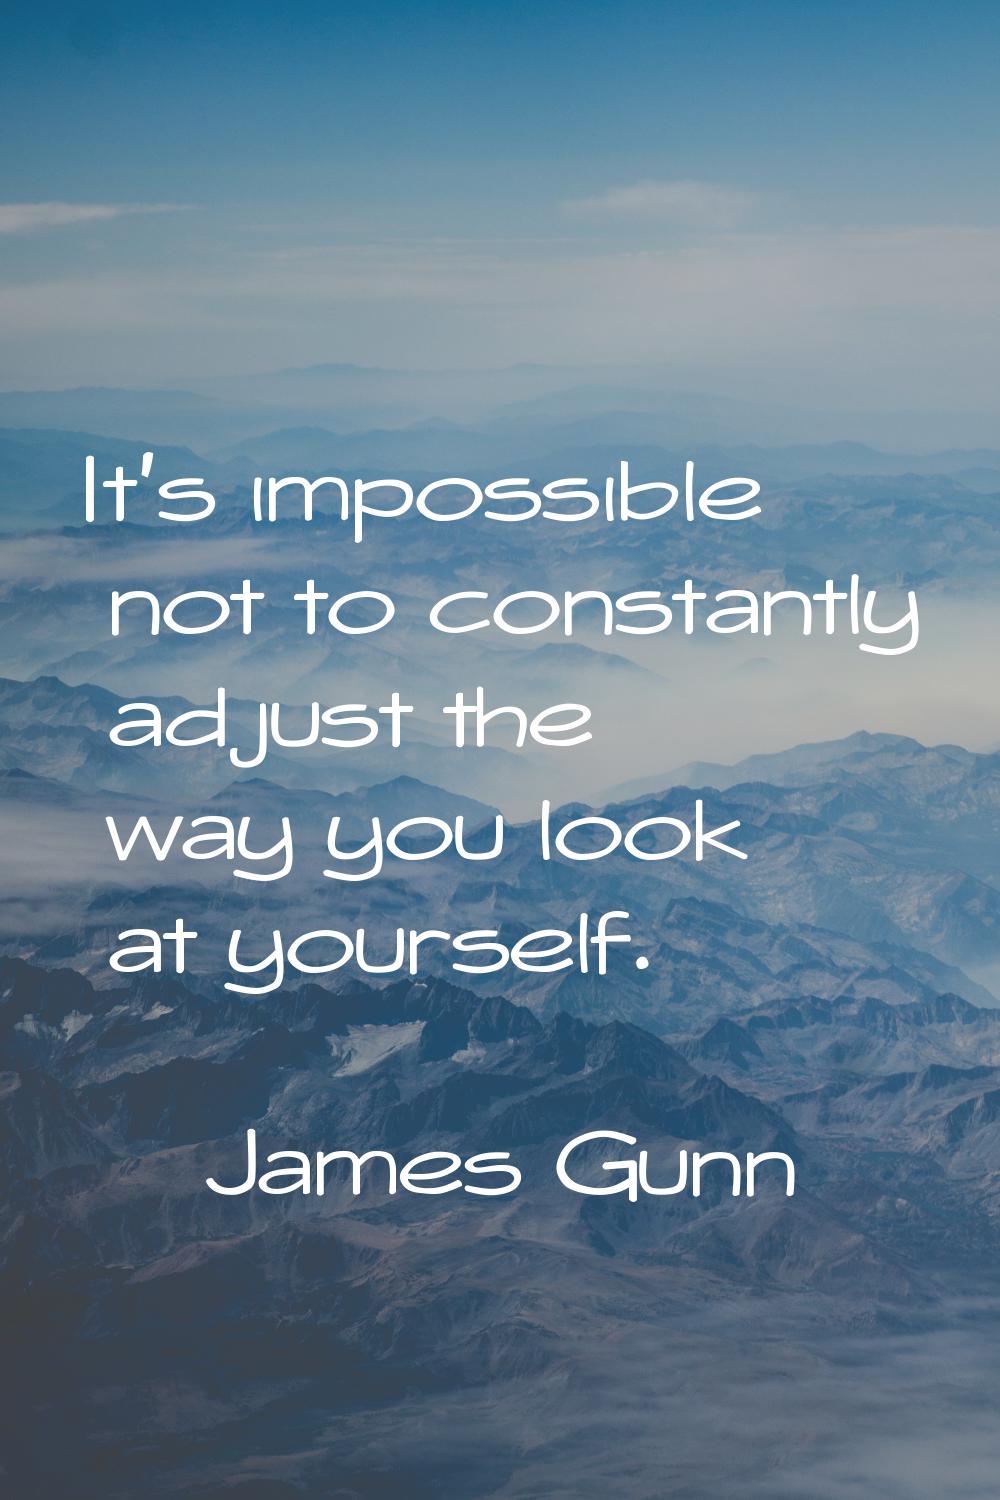 It's impossible not to constantly adjust the way you look at yourself.